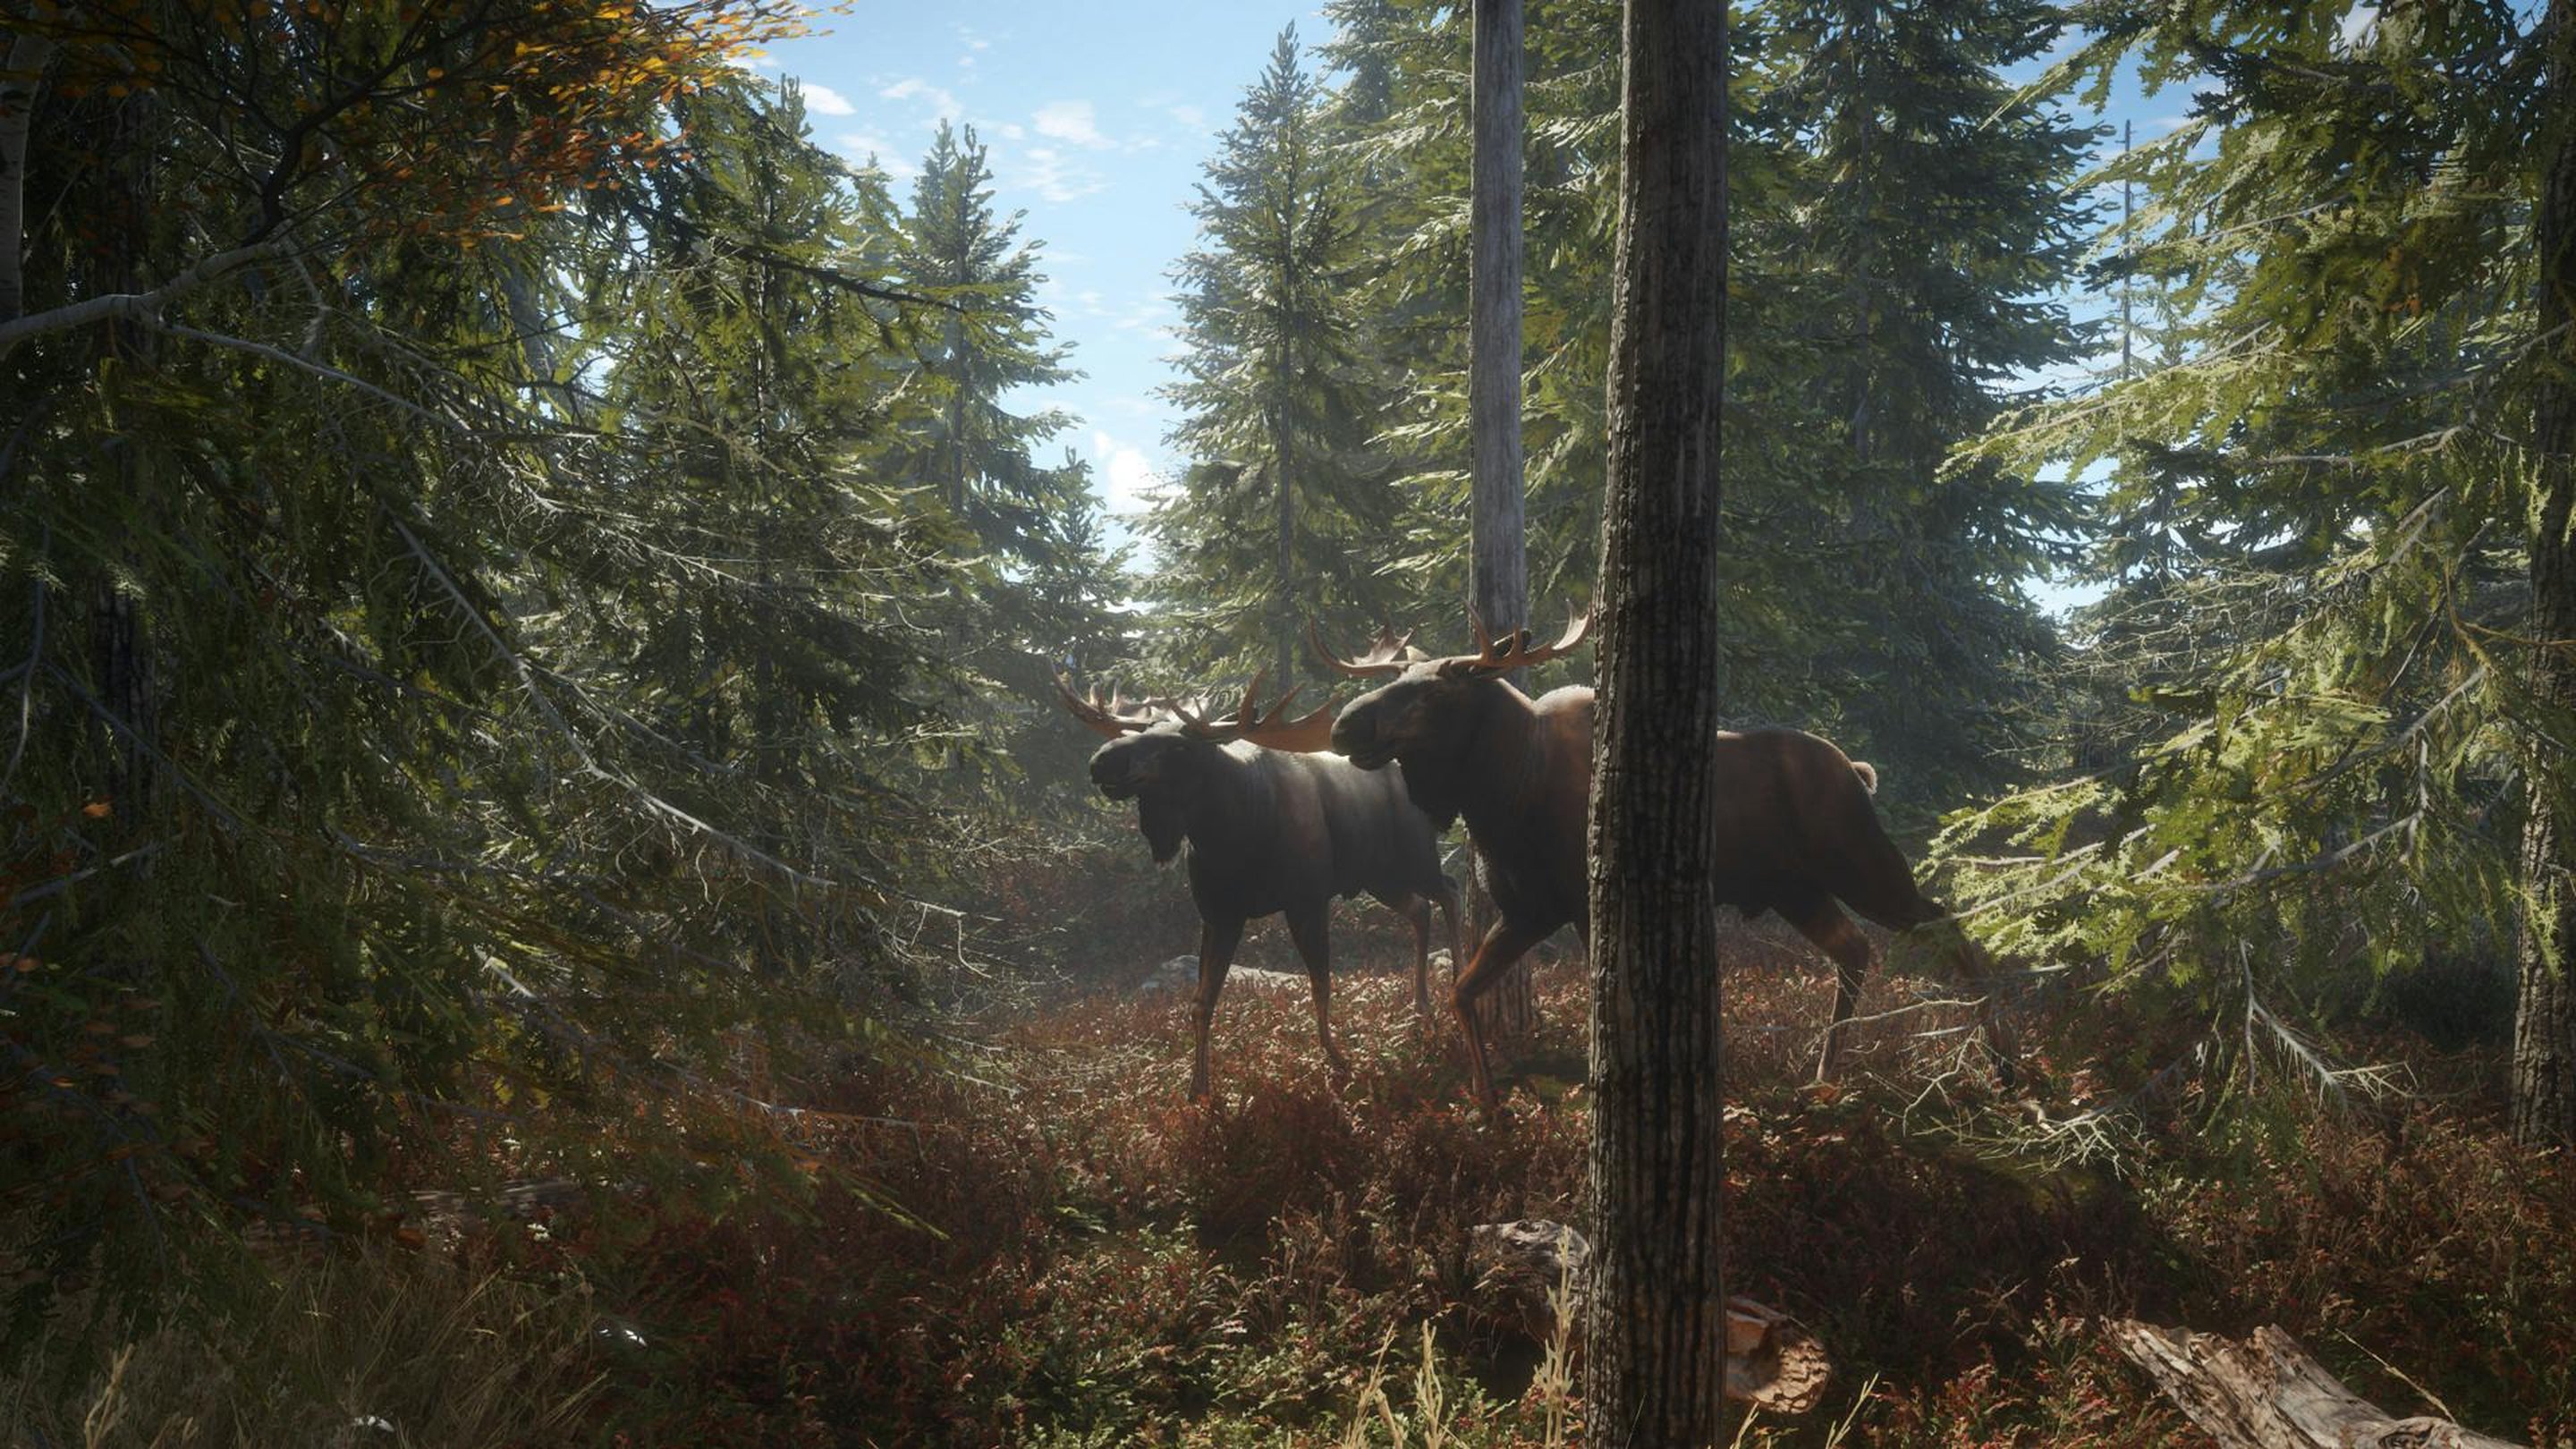 theHunter COTW – Information and More